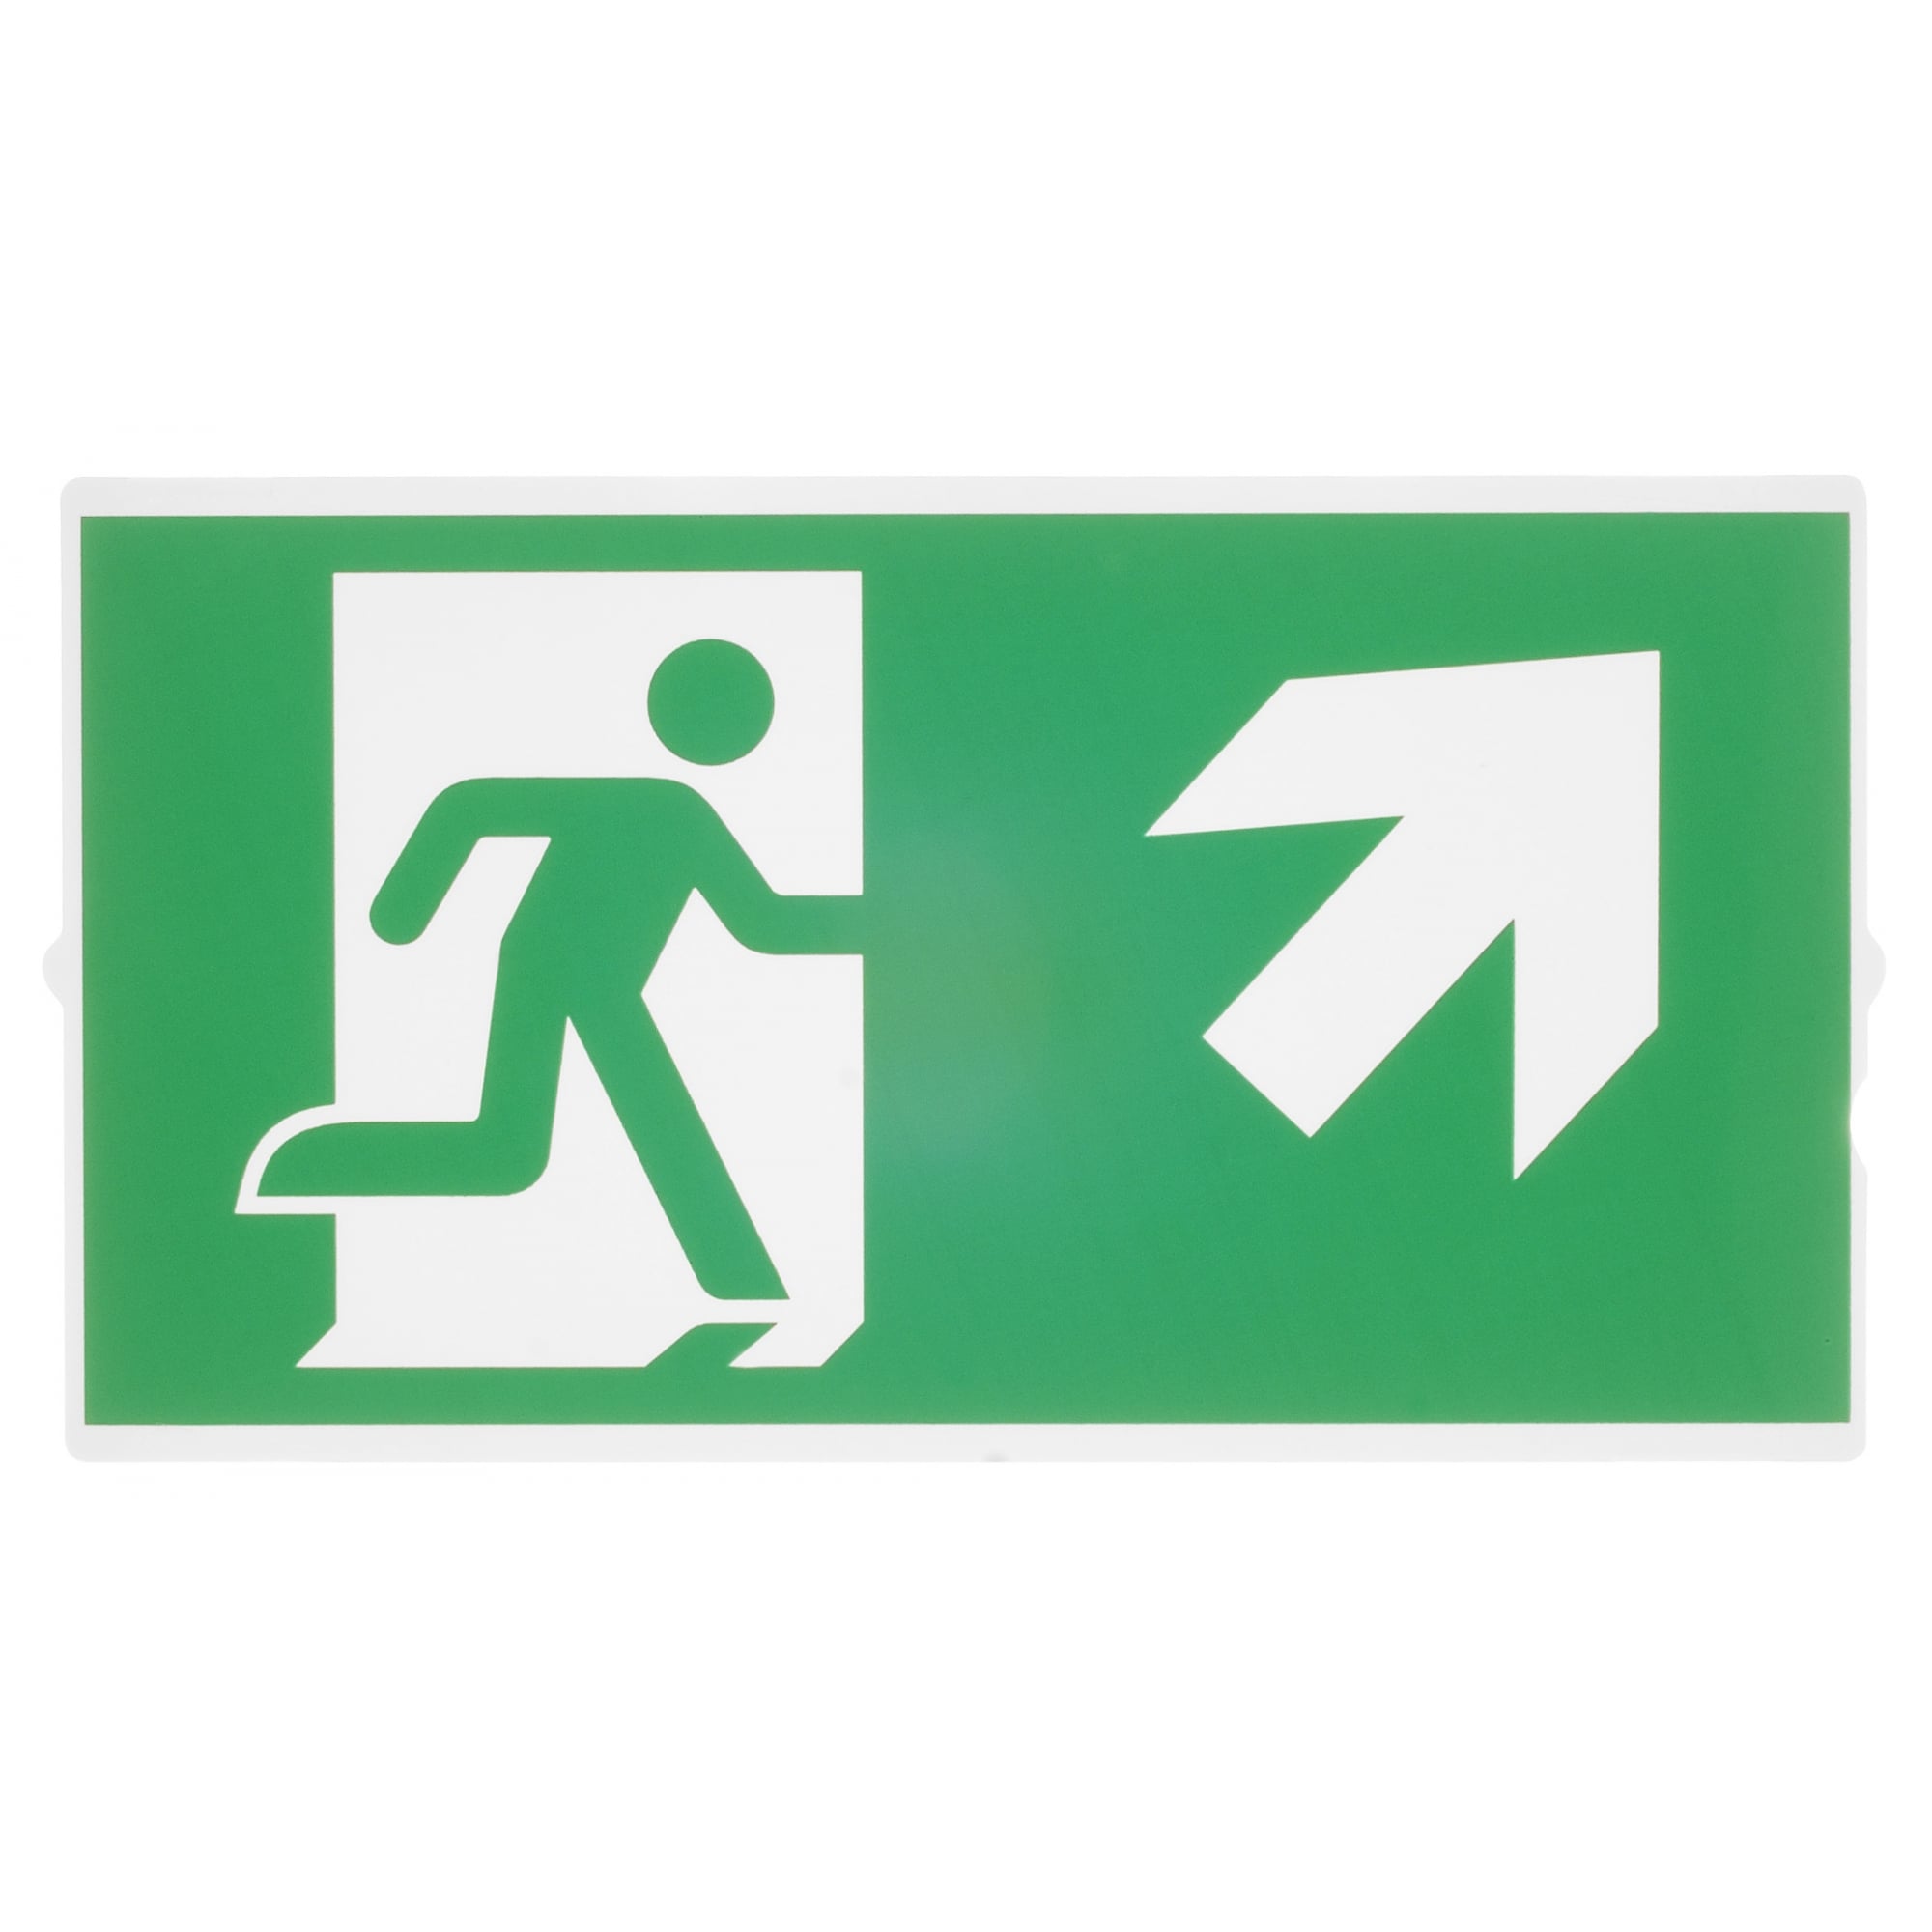 P-Light Emergency Stair Sign,Small, Green